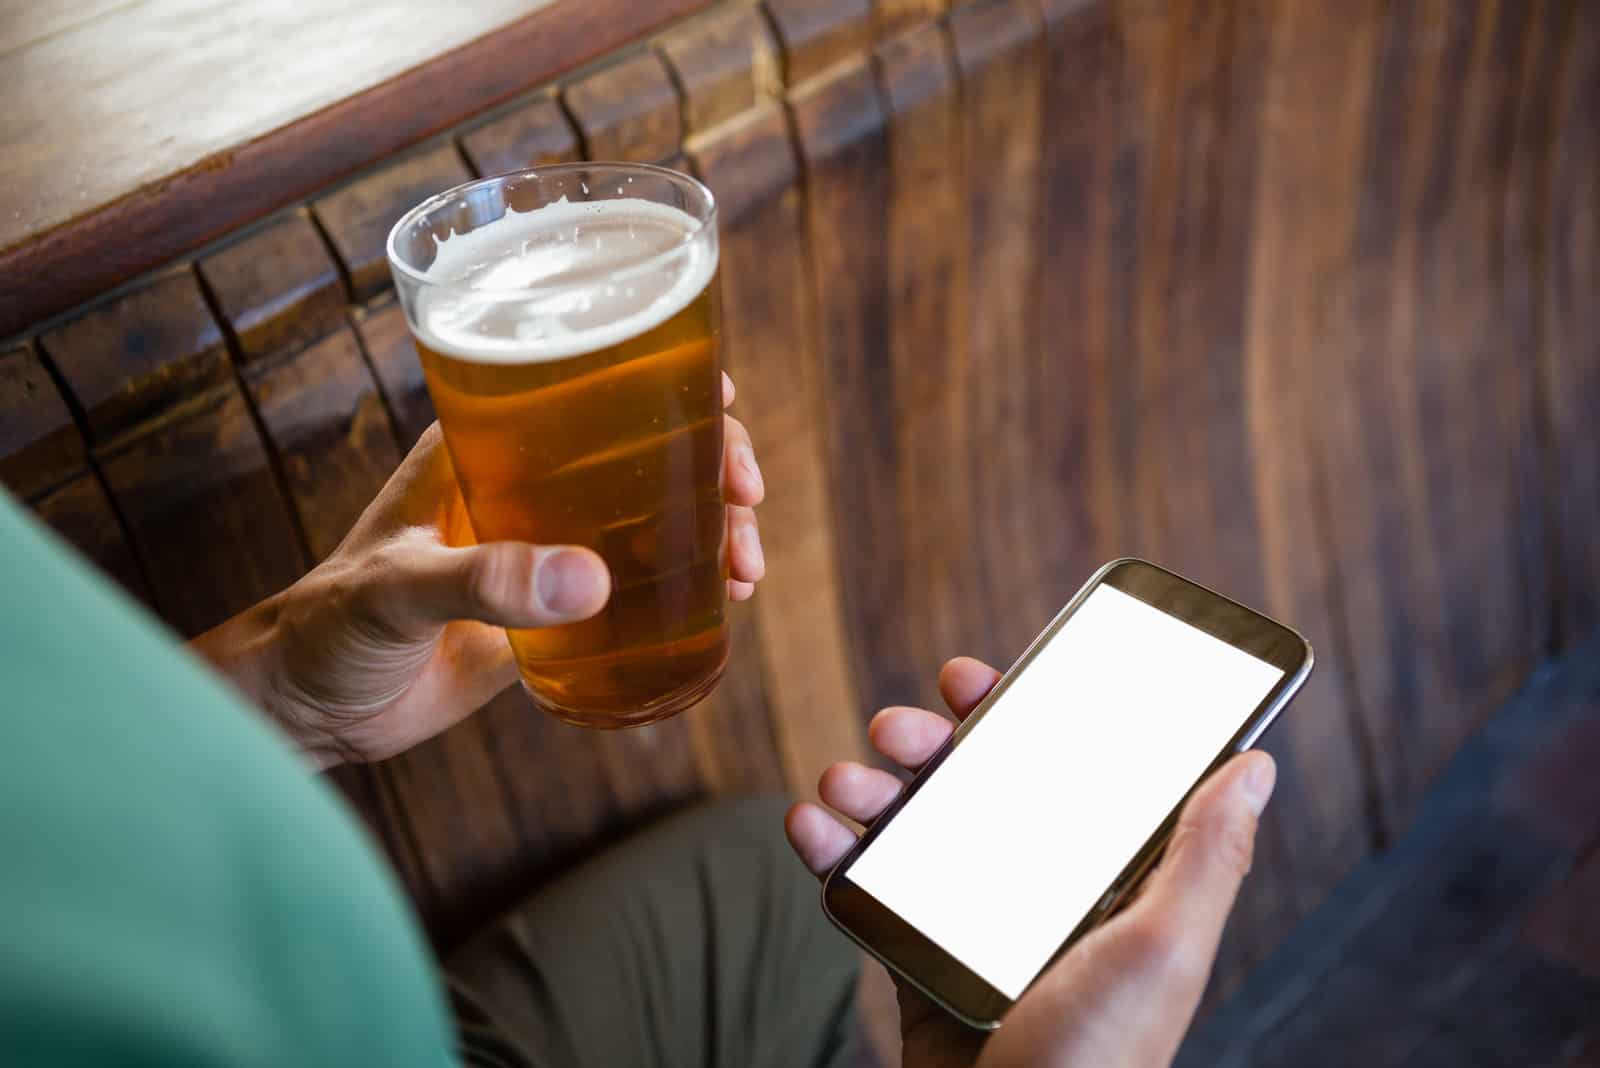 a man drinks a beer and holds a phone in his hand